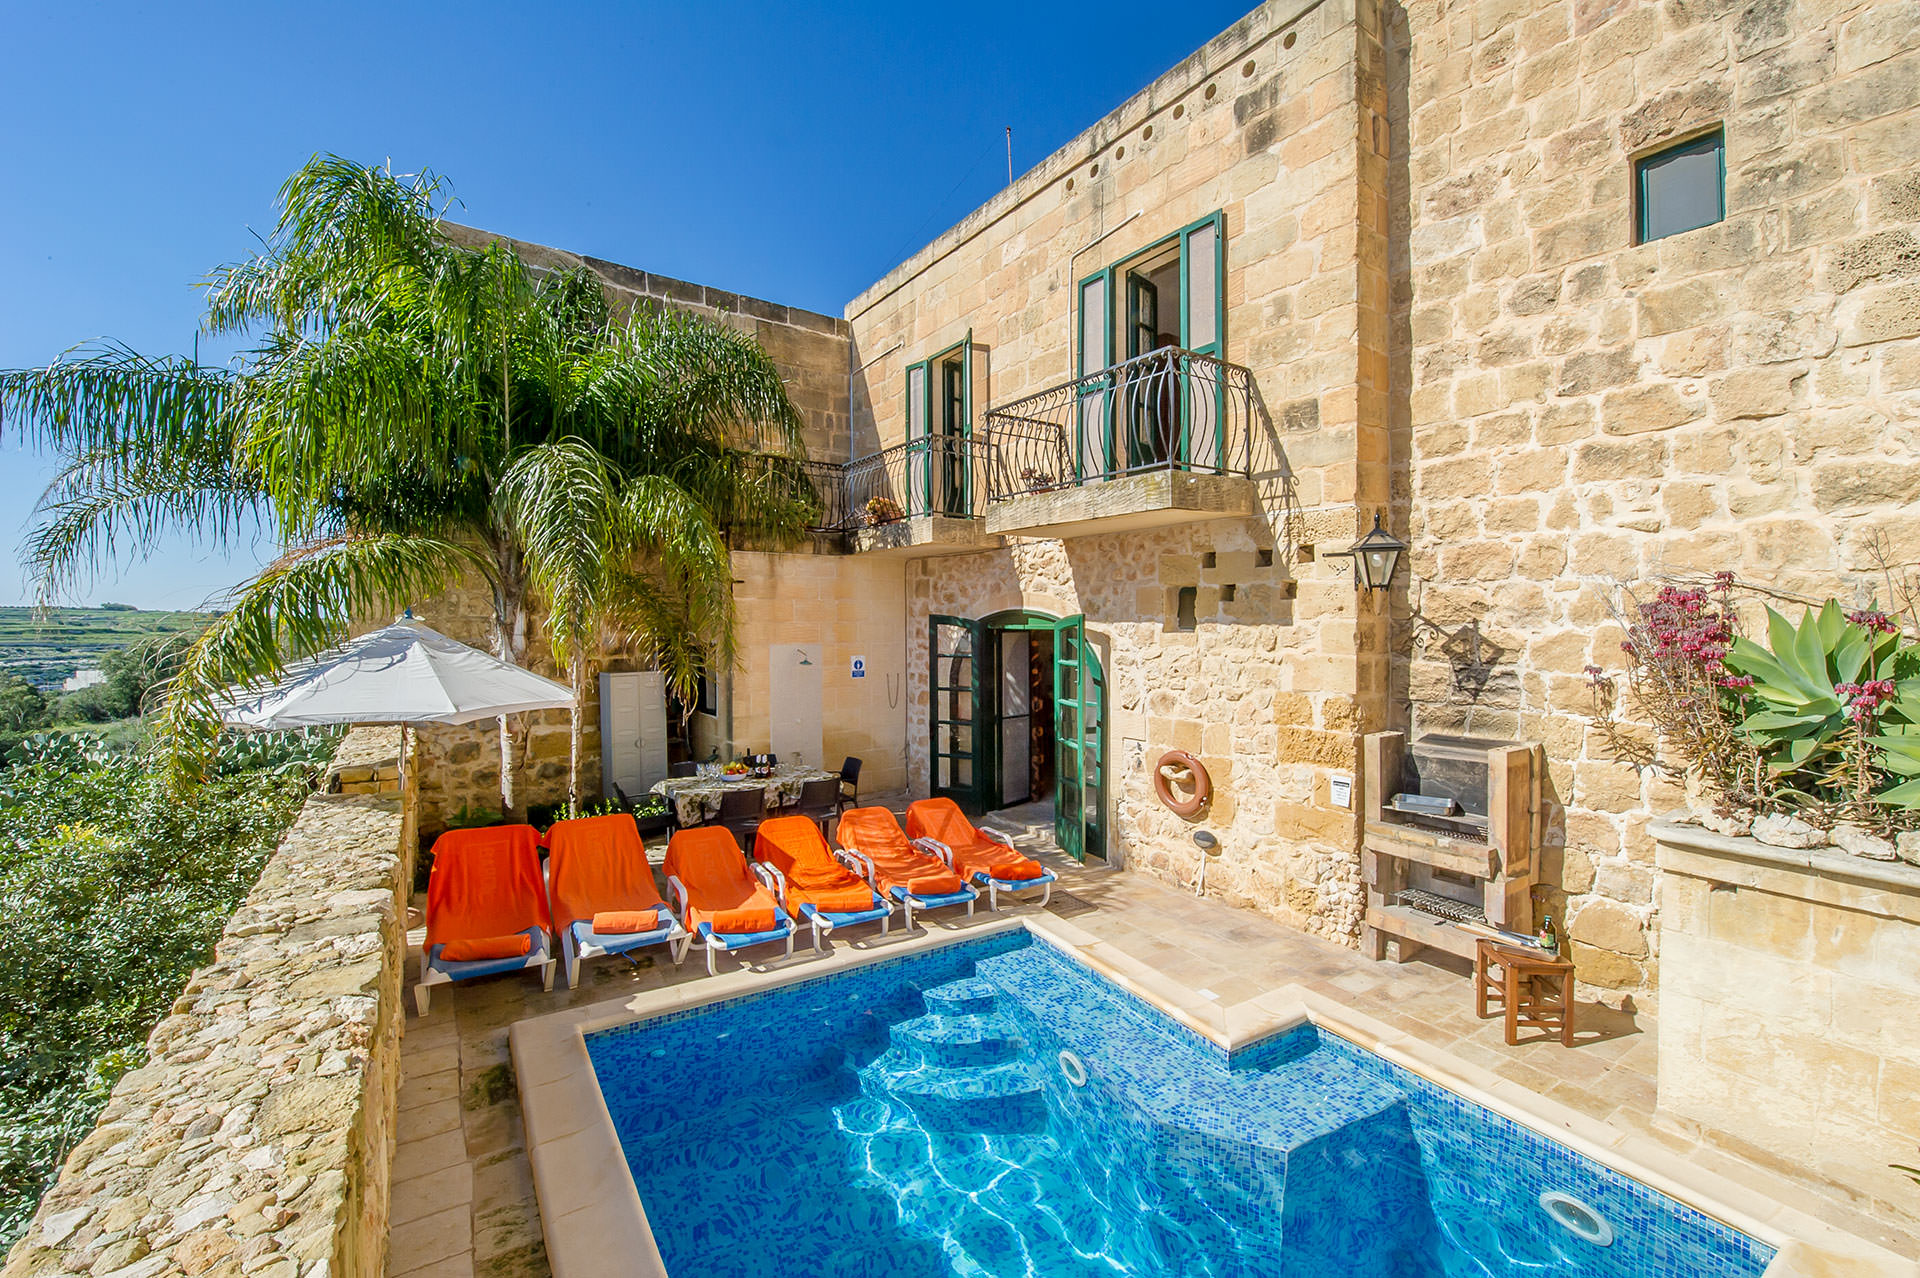 Buying property in Malta as a second home